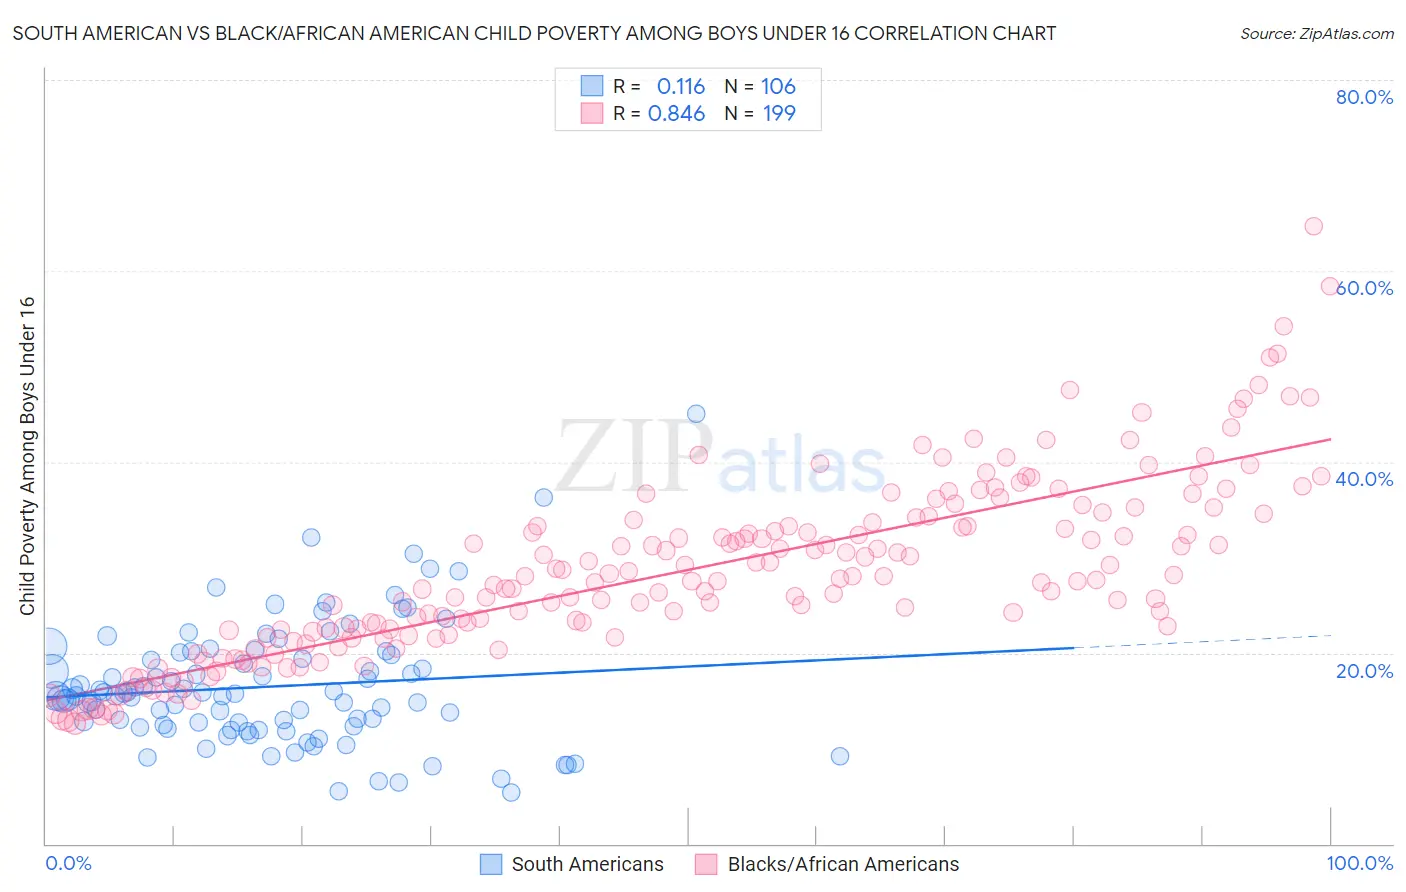 South American vs Black/African American Child Poverty Among Boys Under 16